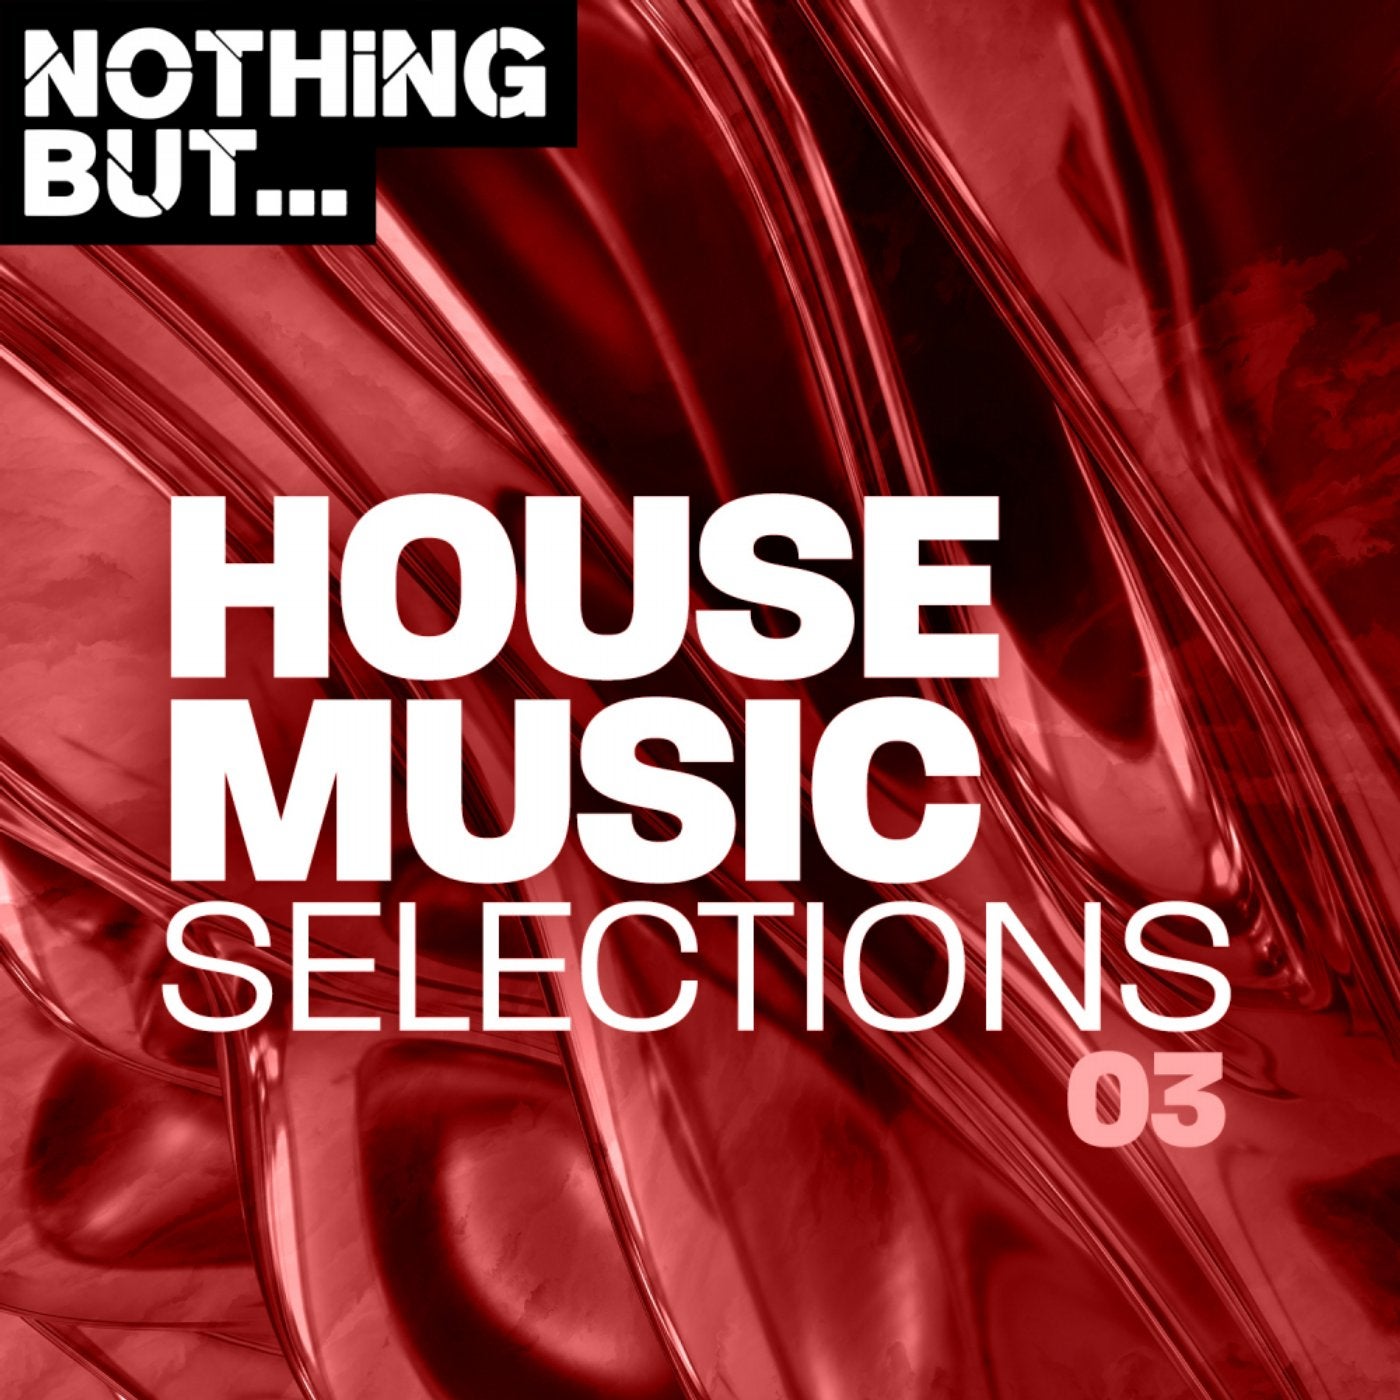 Nothing But... House Music Selections, Vol. 03